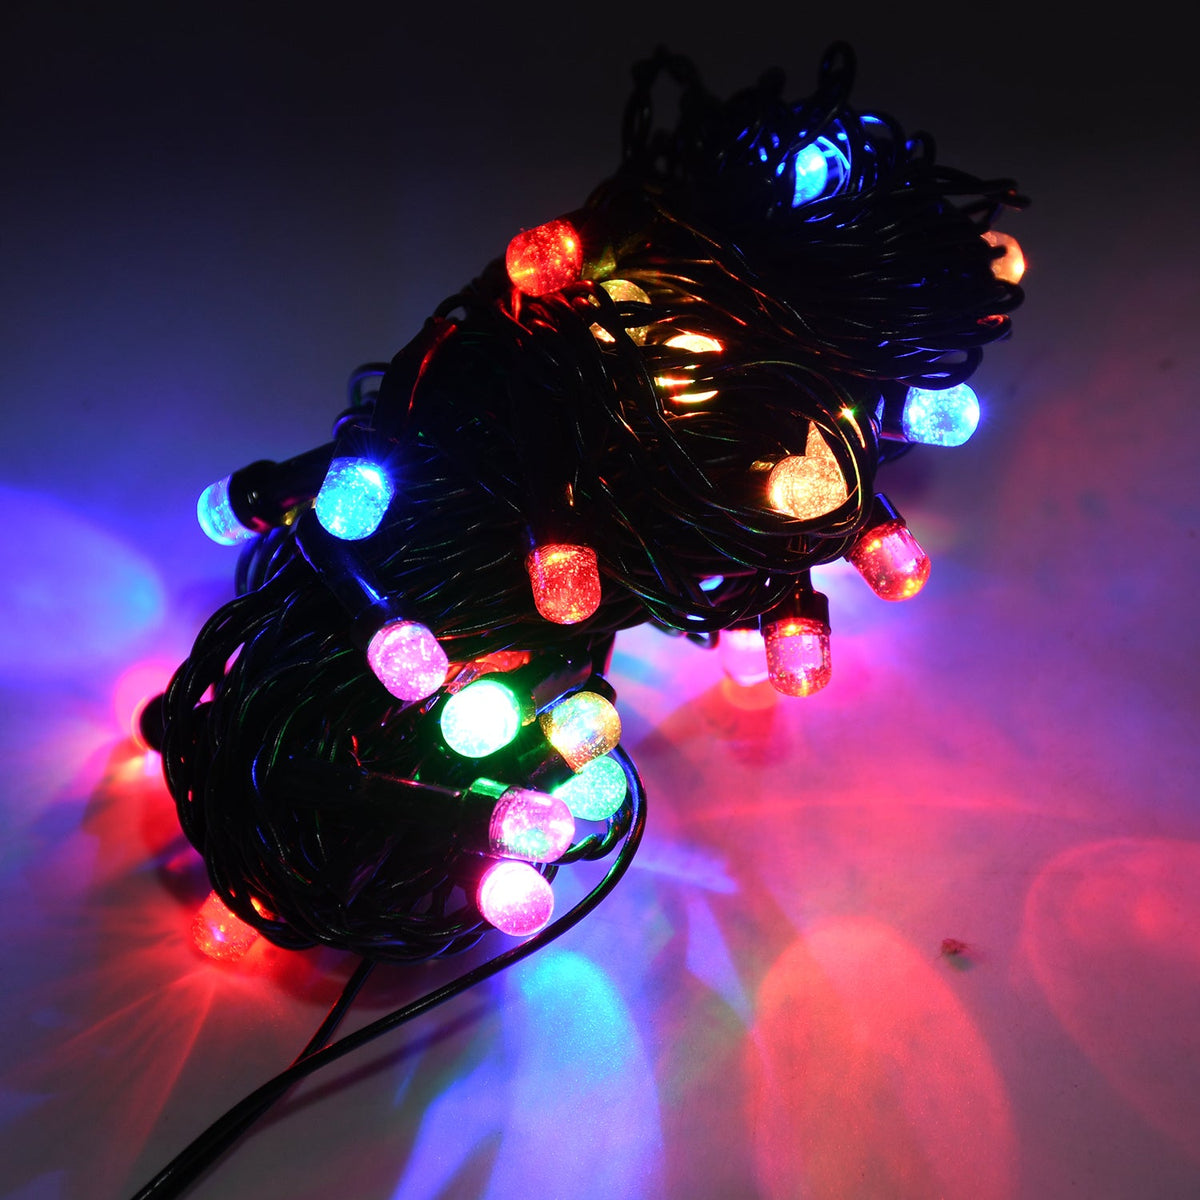 8340 9Mtr Home Decoration Diwali & Wedding LED Christmas String Light Indoor and Outdoor Light ,Festival Decoration Led String Light, Multi-Color Light (36L 9 Mtr)